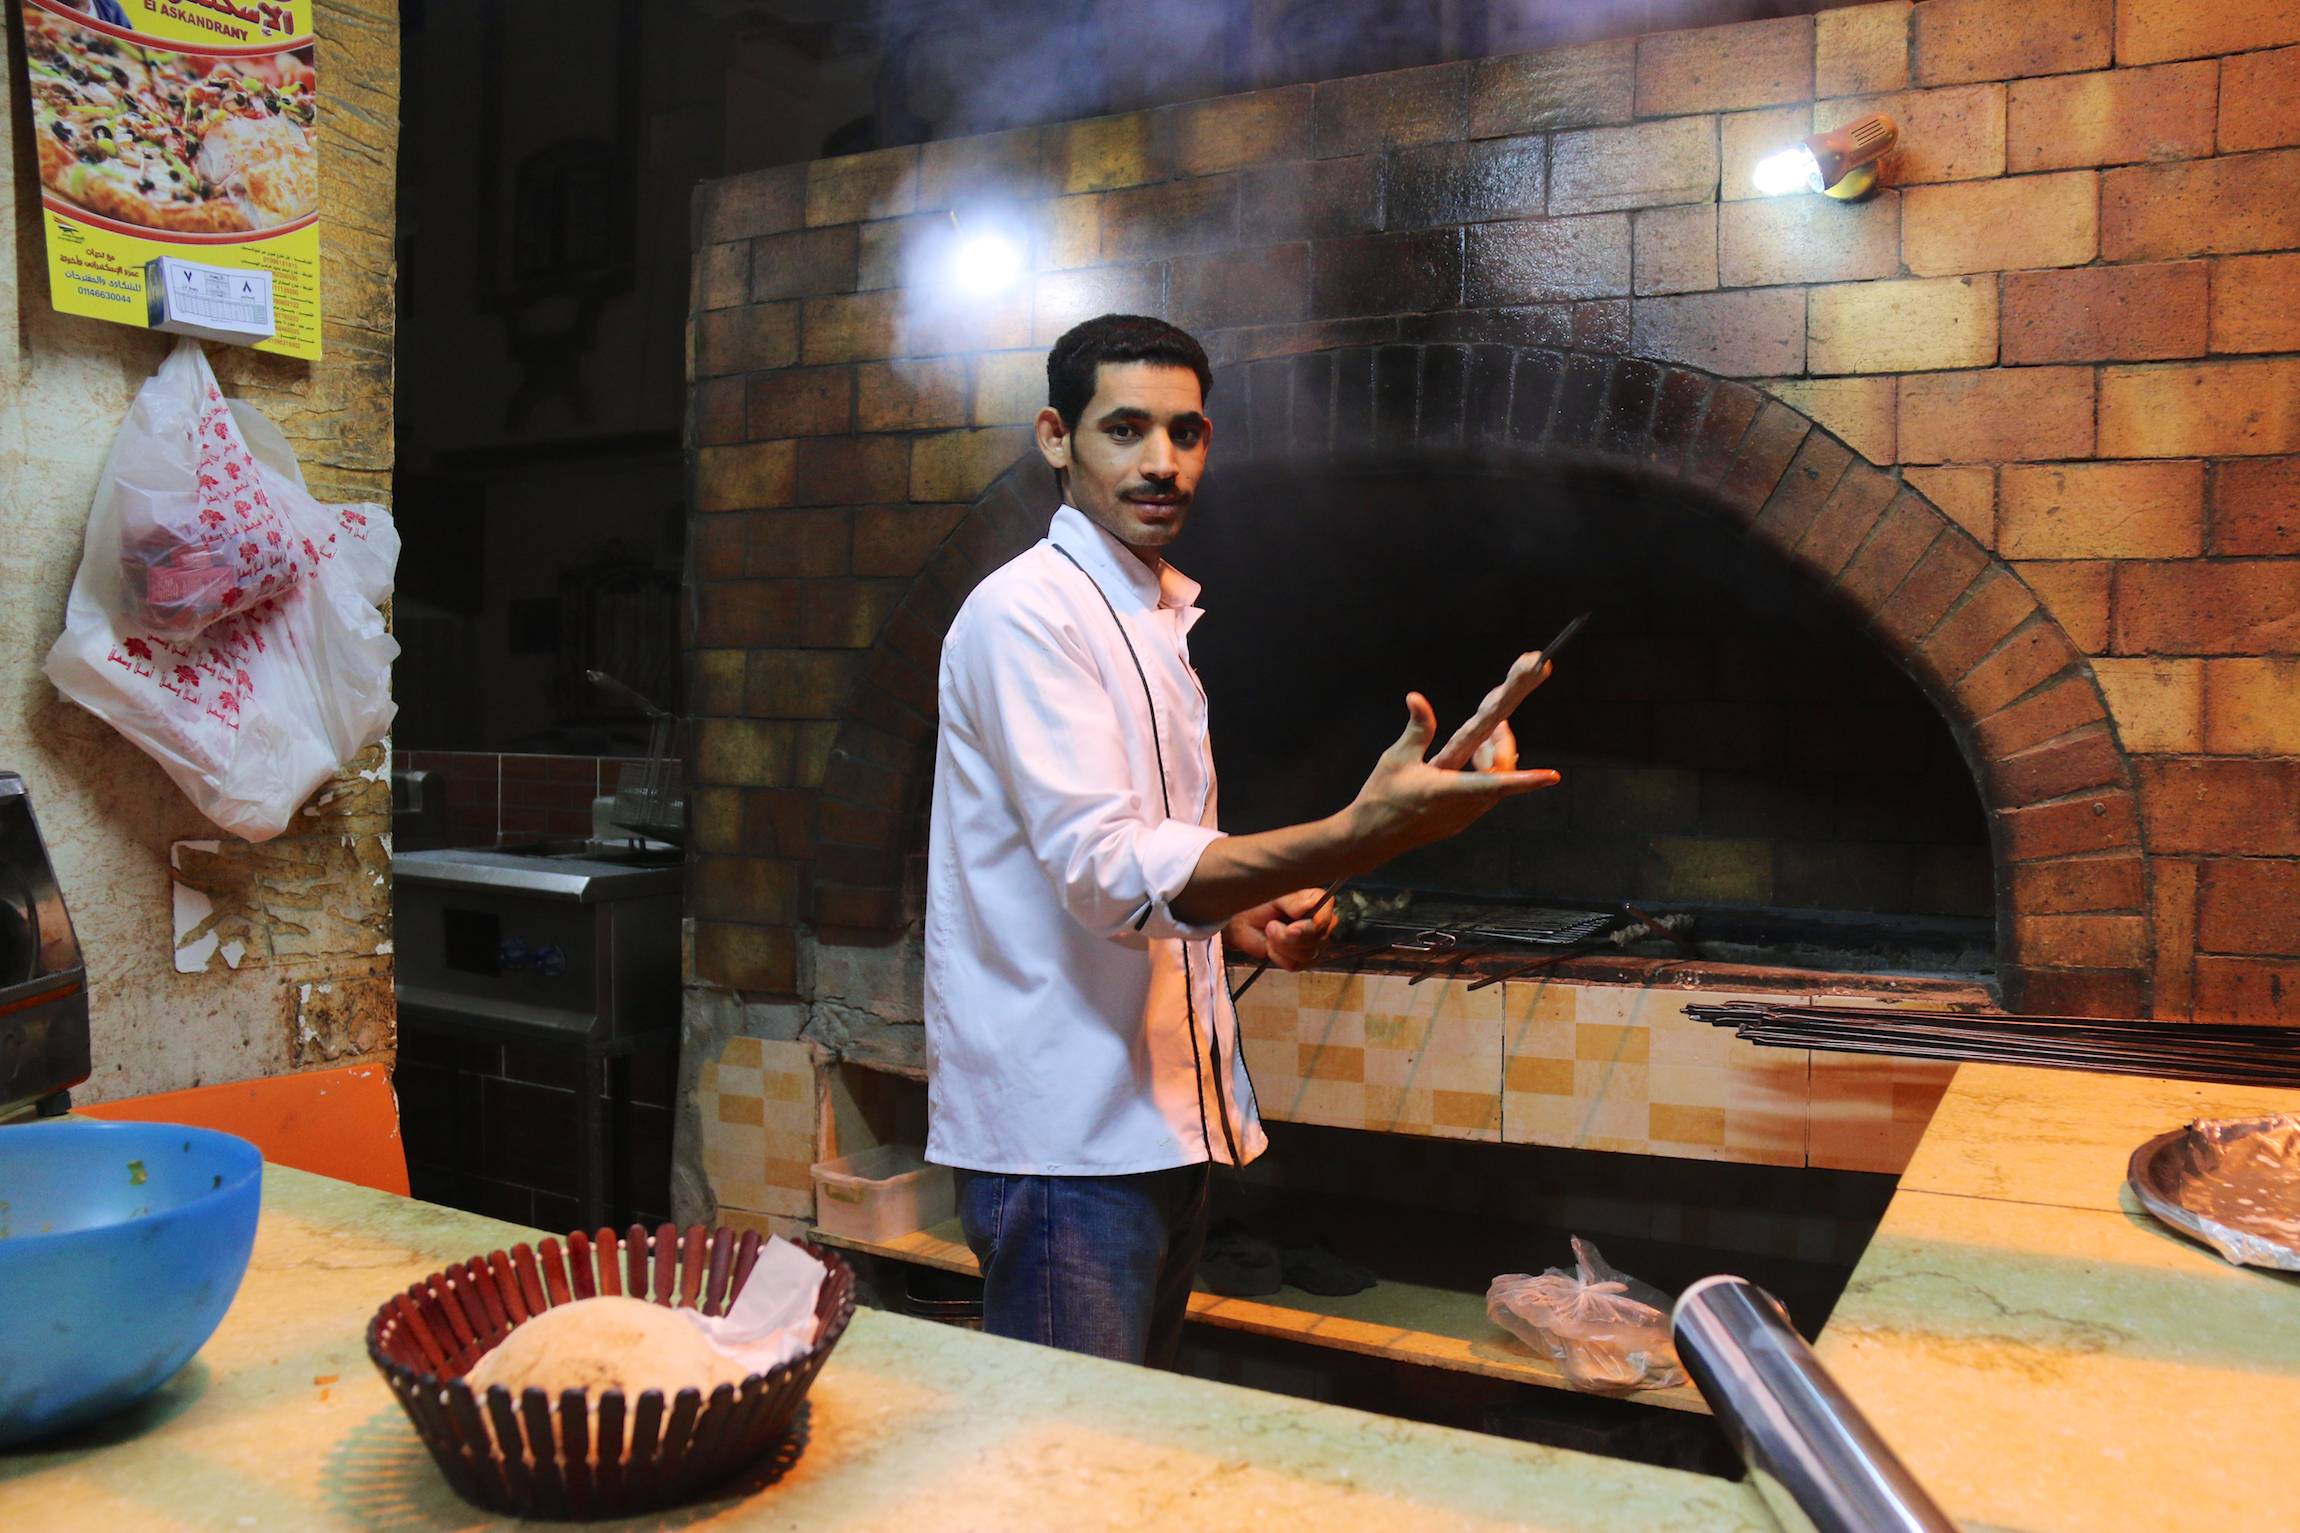 An Egyptian cook poses for a portrait as he prepares dinner for guests in El Quseir, Egypt, Jan. 8, 2014.